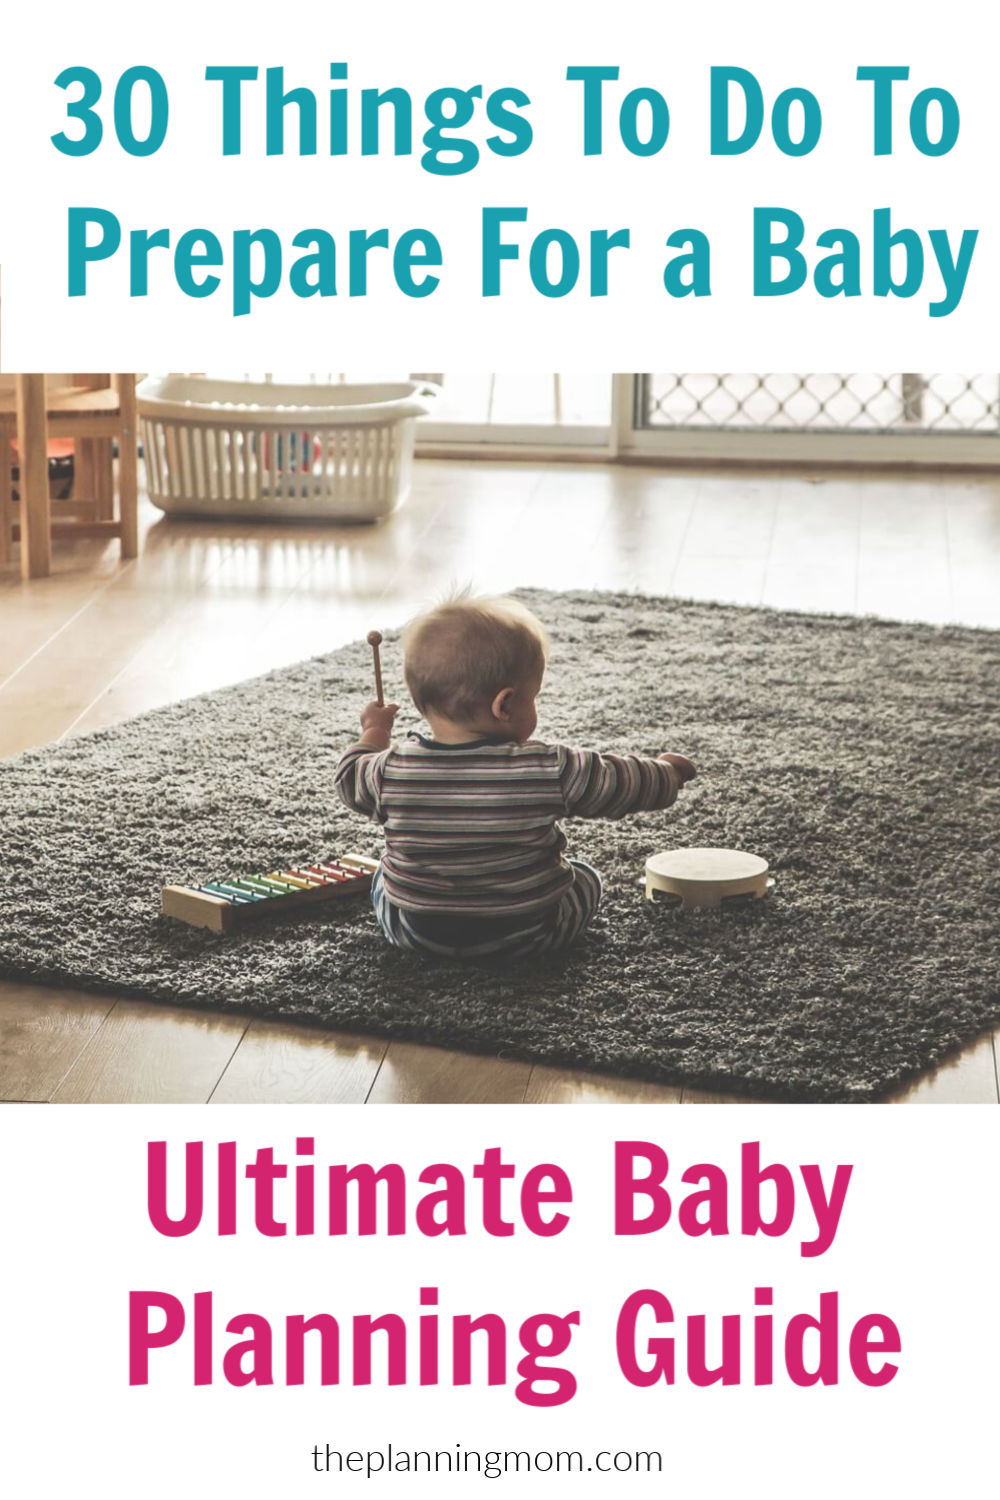 https://www.theplanningmom.com/wp-content/uploads/30-things-to-do-to-prepare-for-a-baby-ultimate-baby-planning-guide.jpg